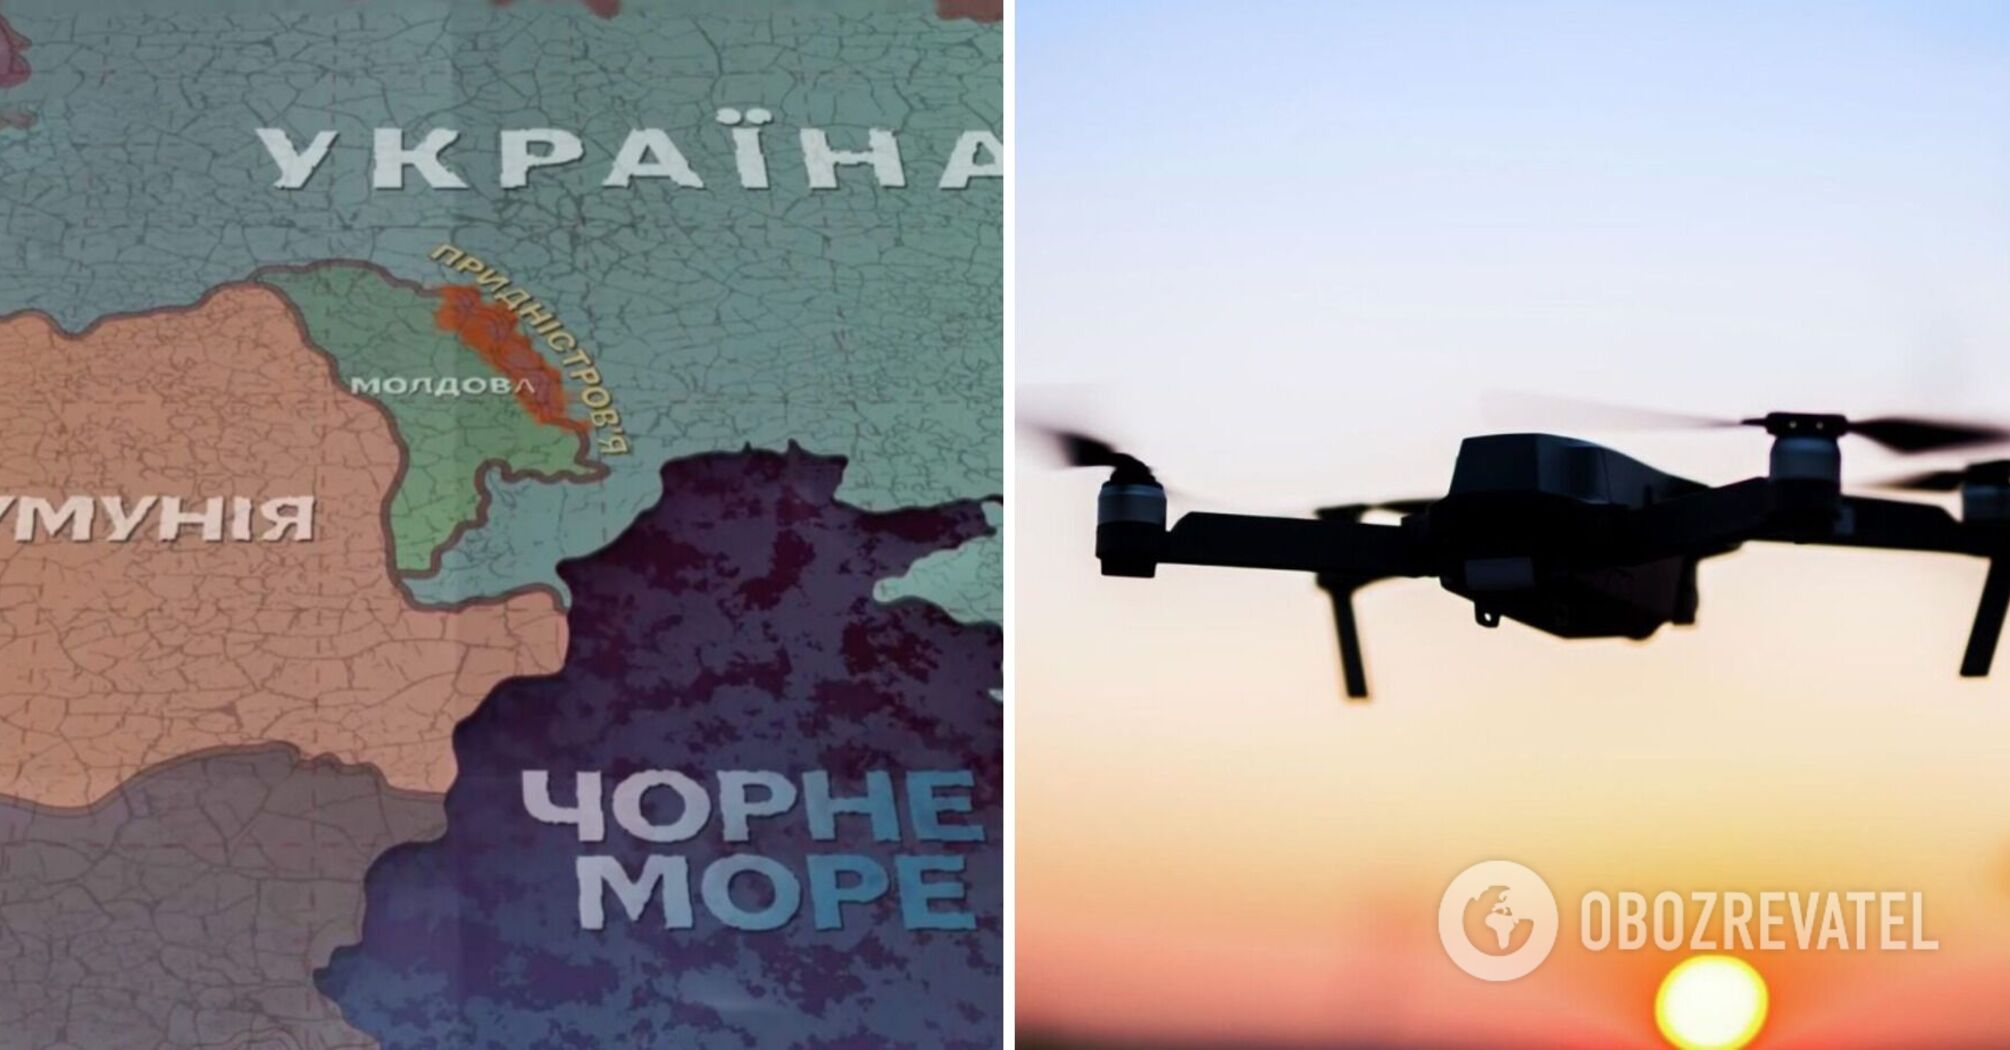 A drone attack on a military unit reported in Transnistria: DIU's reaction